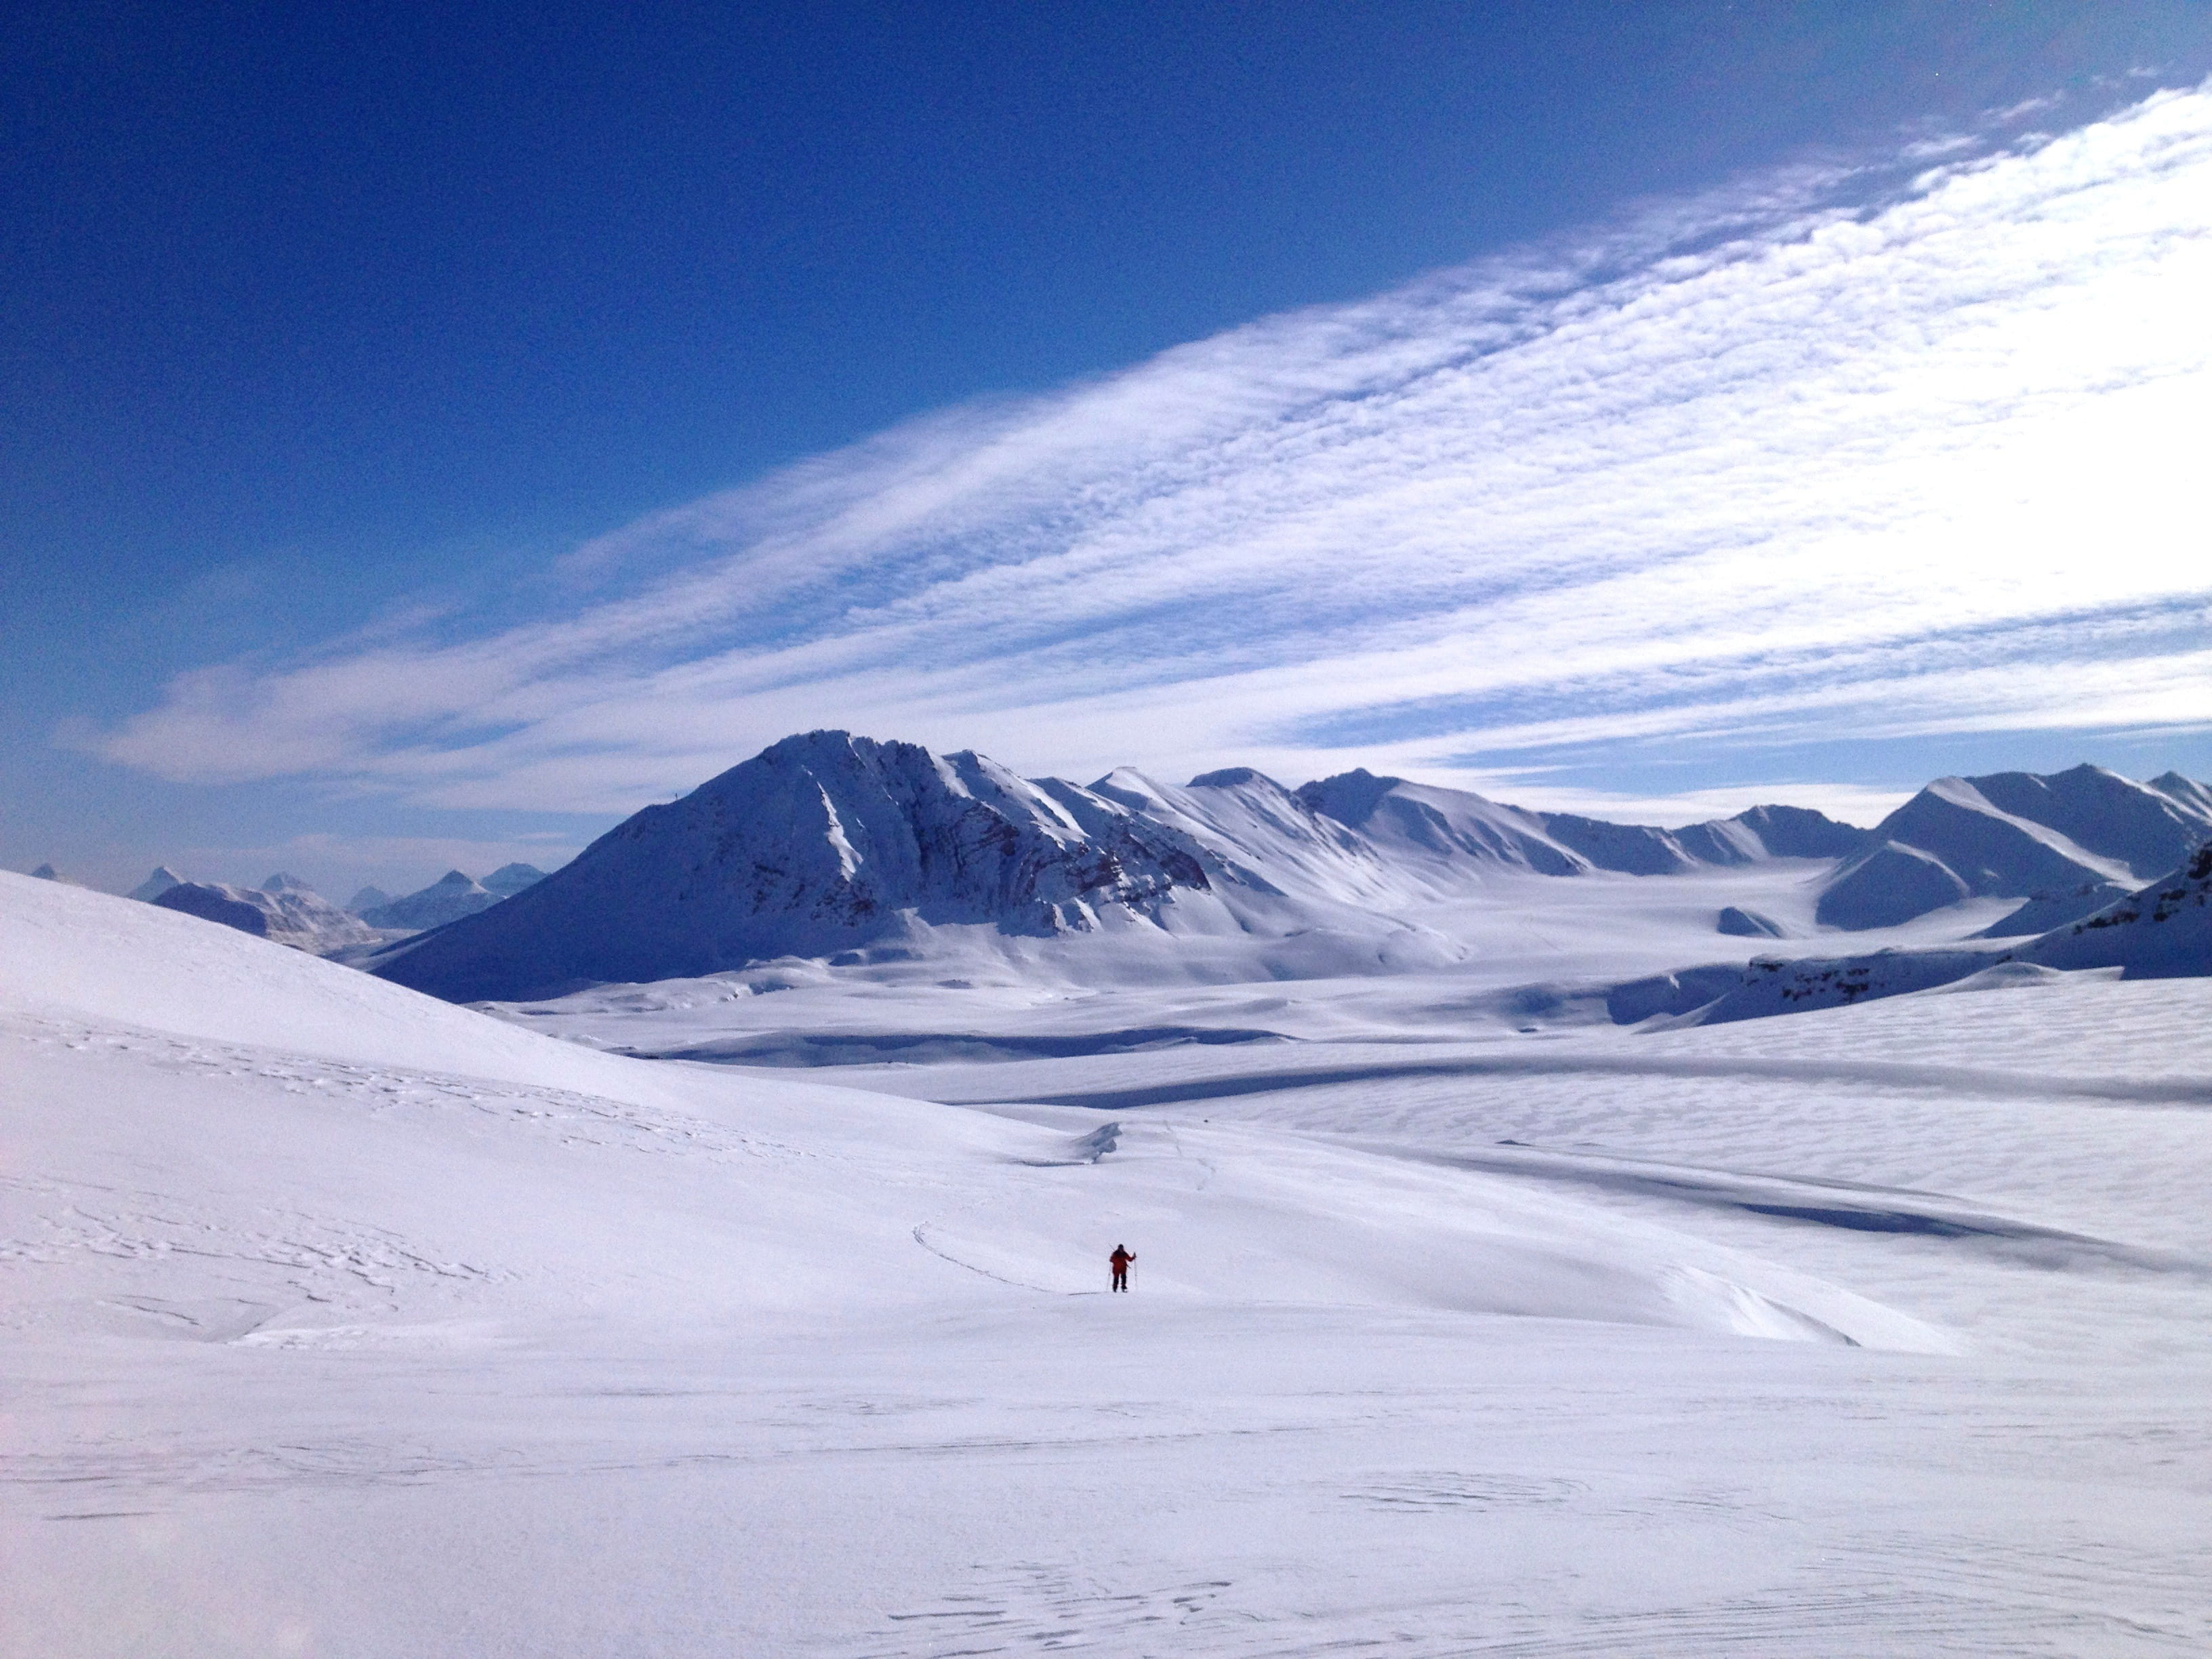 I went back to Ny-Ålesund later in the year and this time needed to cross-country ski around to collect water samples. The scenery was gorgeous!